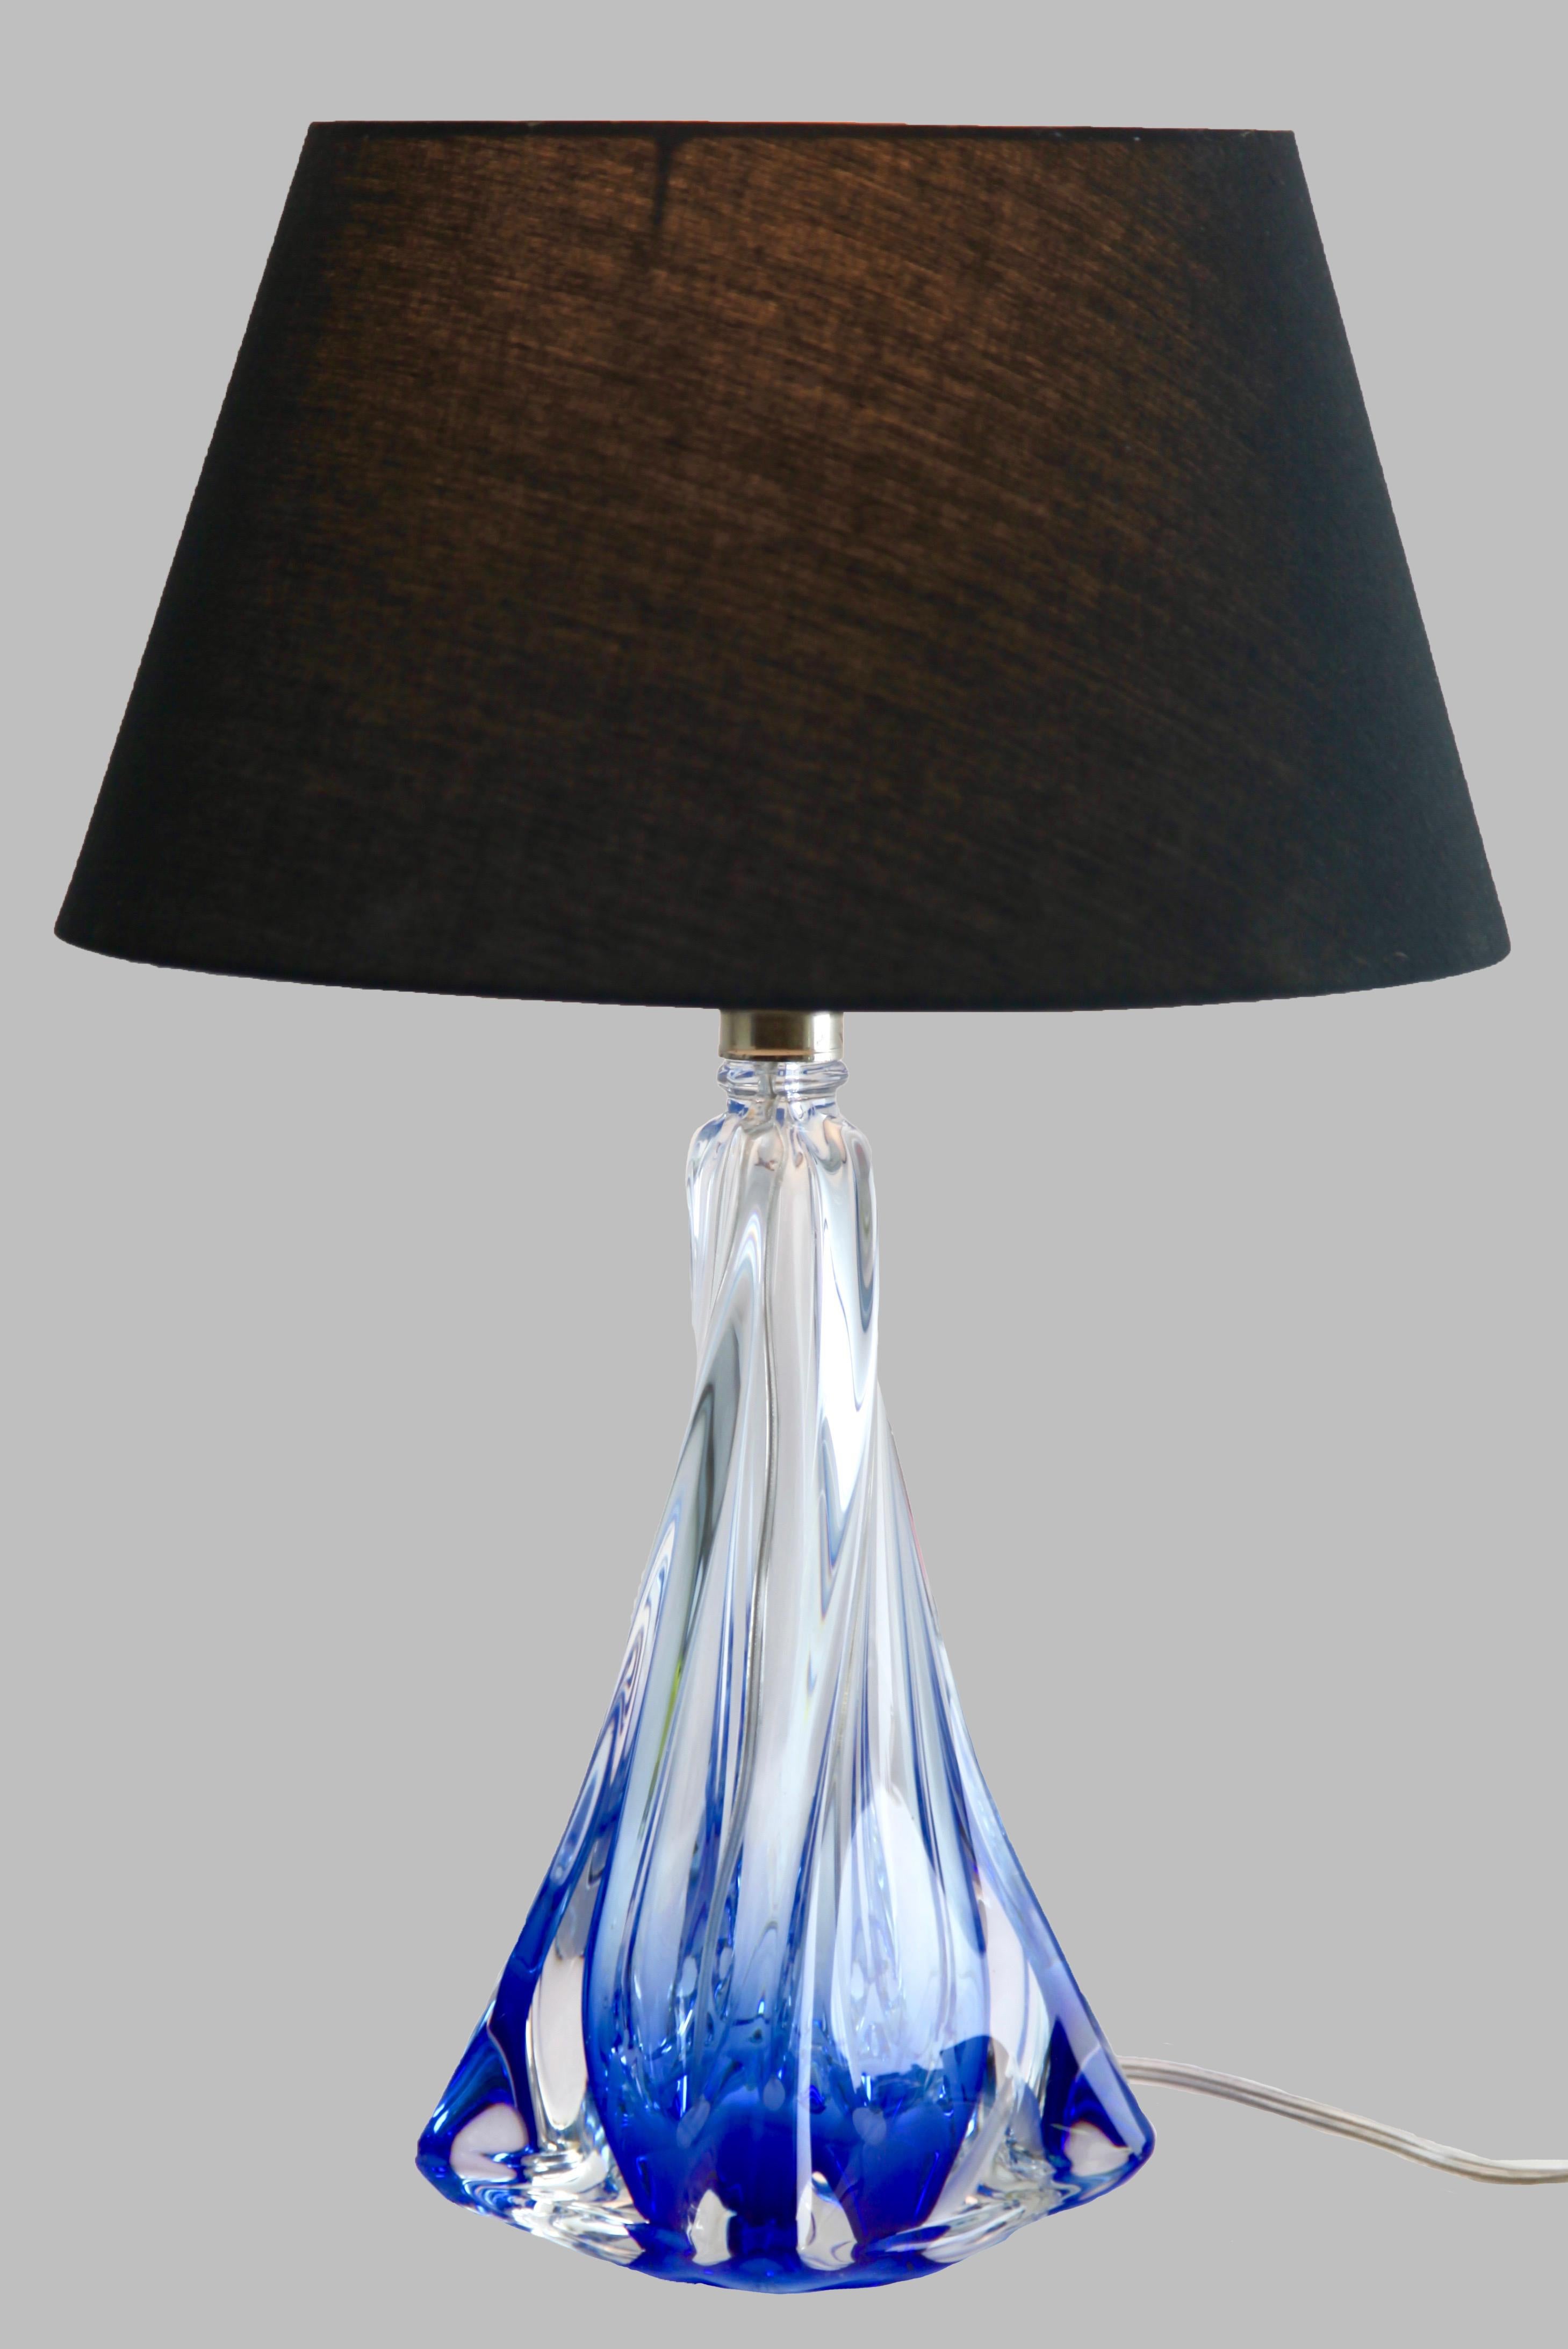 Val St. Lambert is a Belgian crystal glassware manufacturer, founded in 1826 and based in Seraing. It is the official glassware supplier to King Albert II.

The sizes are measured without lampshade.
Height 32 cm 12.59 inch diameter 15 cm 5.9